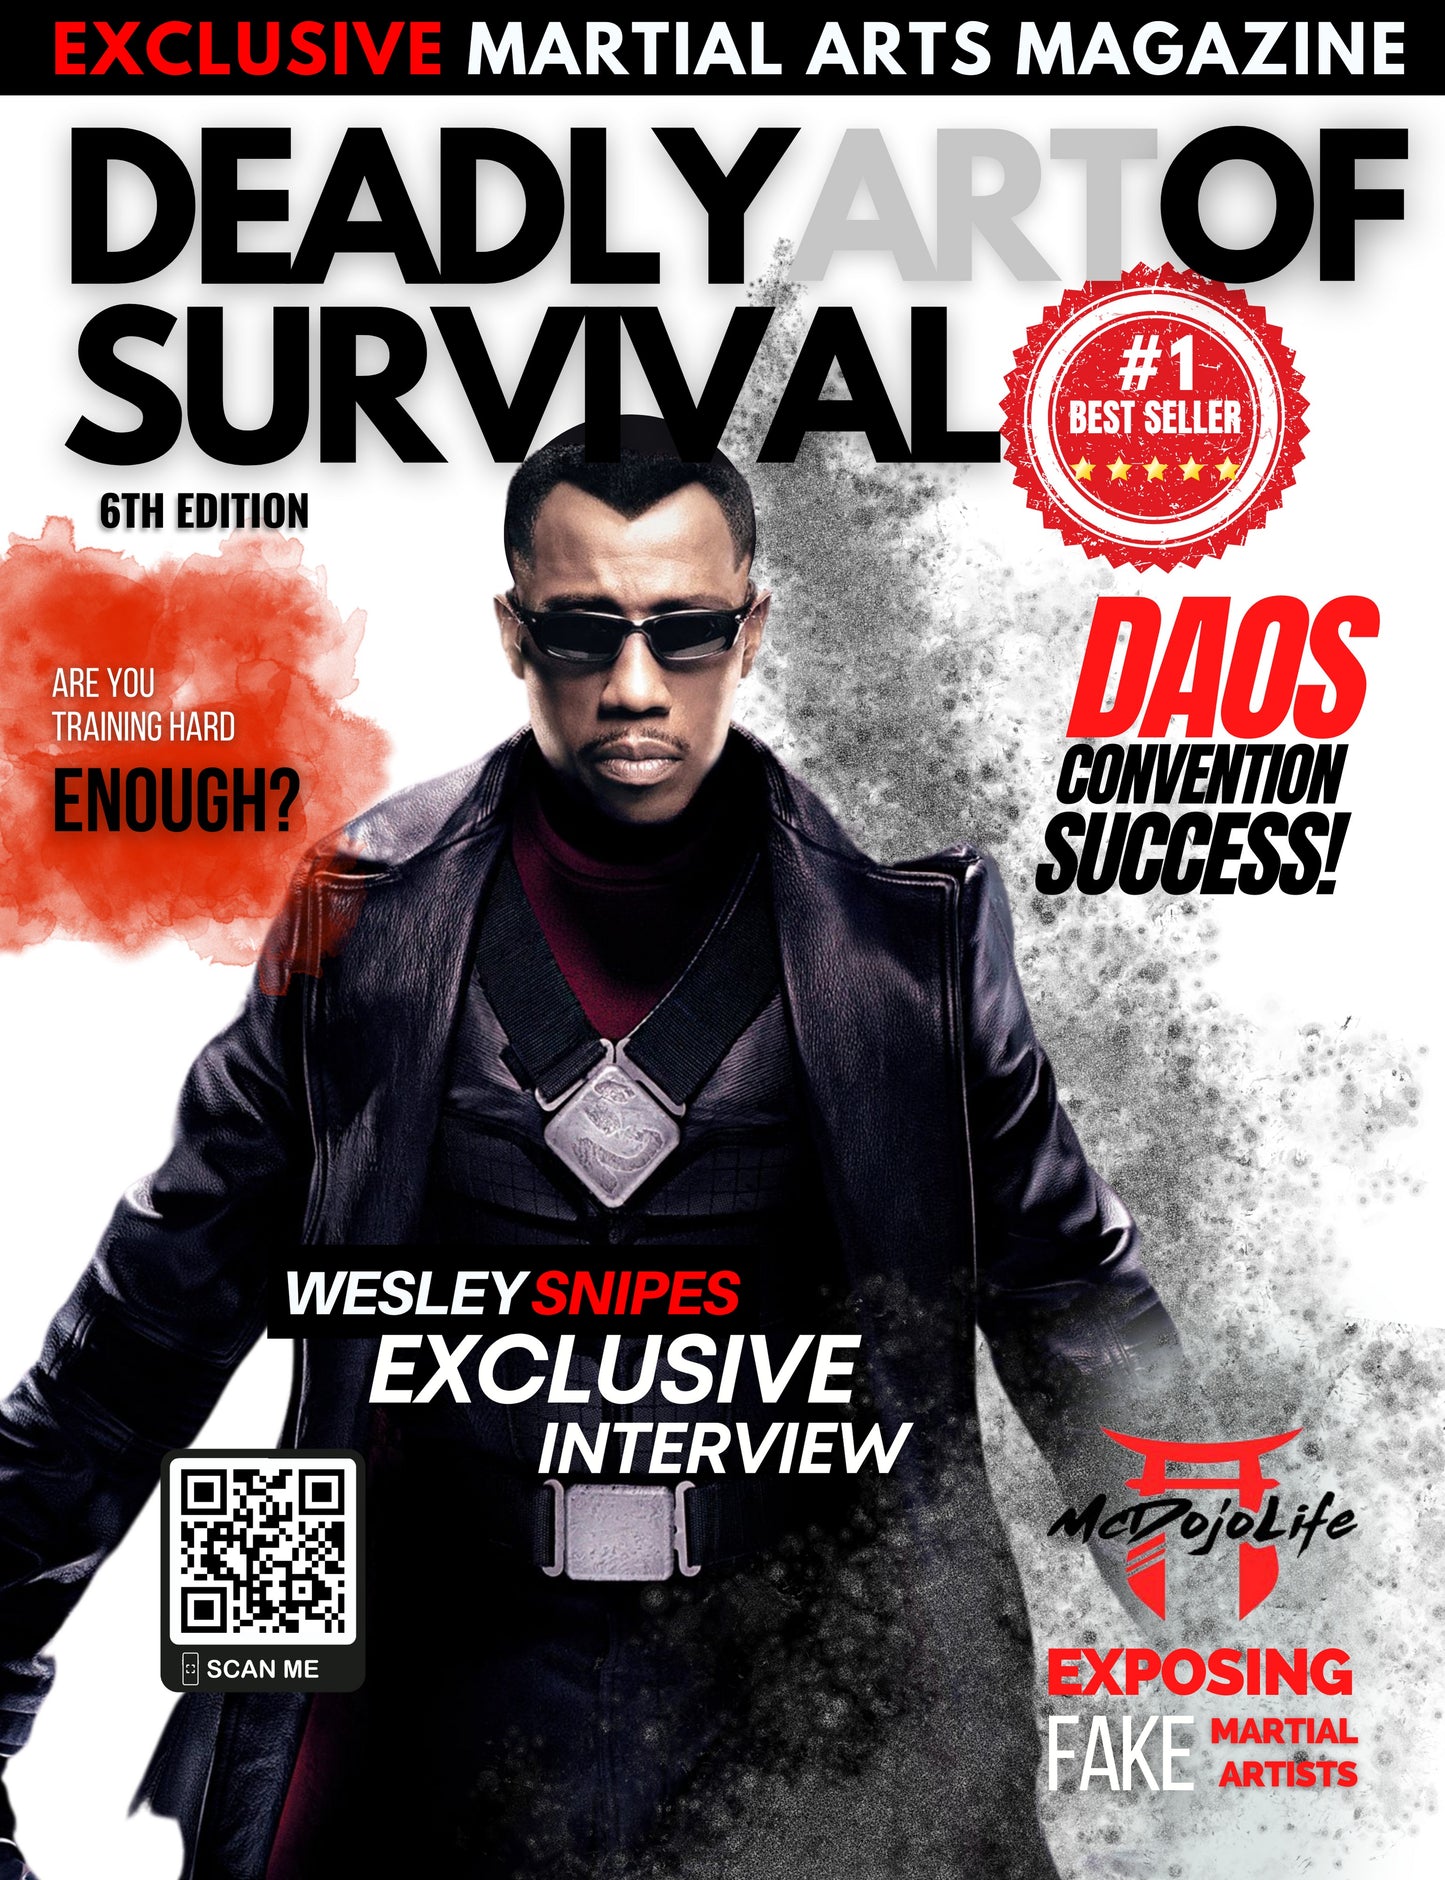 (Free Sample) Deadly Art of Survival Magazine: 6th Edition Featuring Wesley Snipes deadlyartofsurvival.com